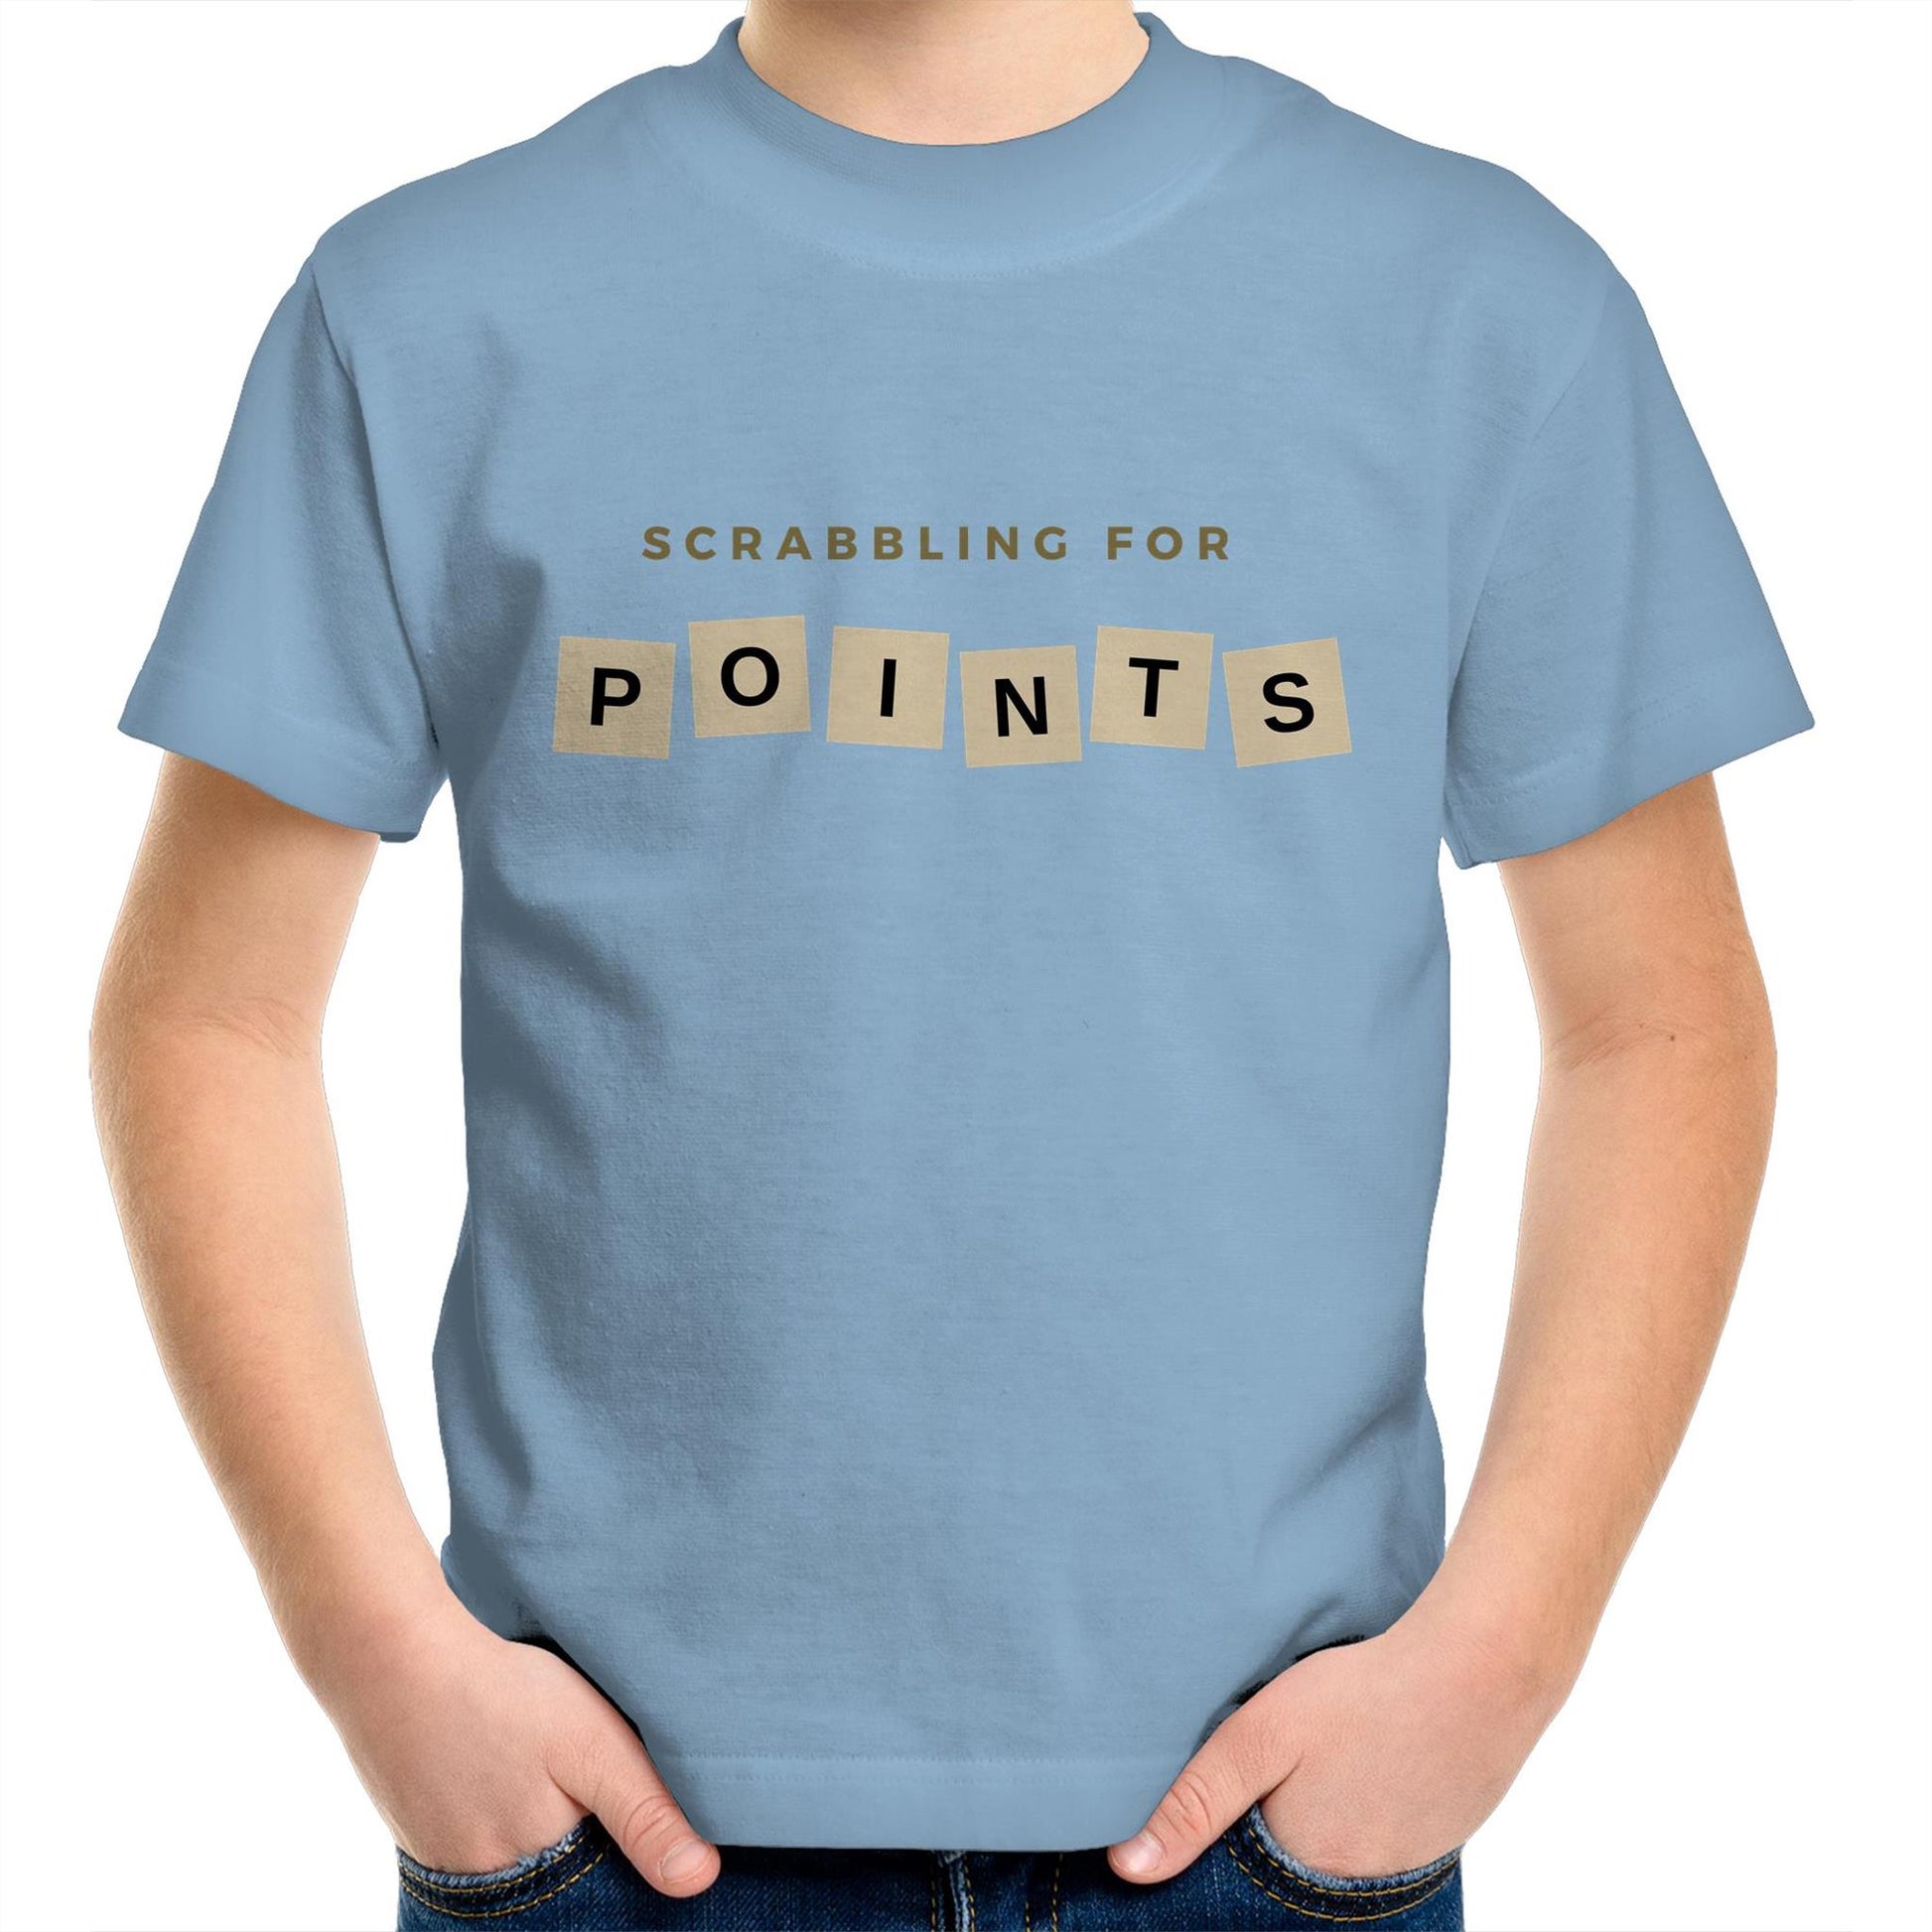 Scrabbling For Points - Kids Youth Crew T-Shirt Carolina Blue Kids Youth T-shirt Games